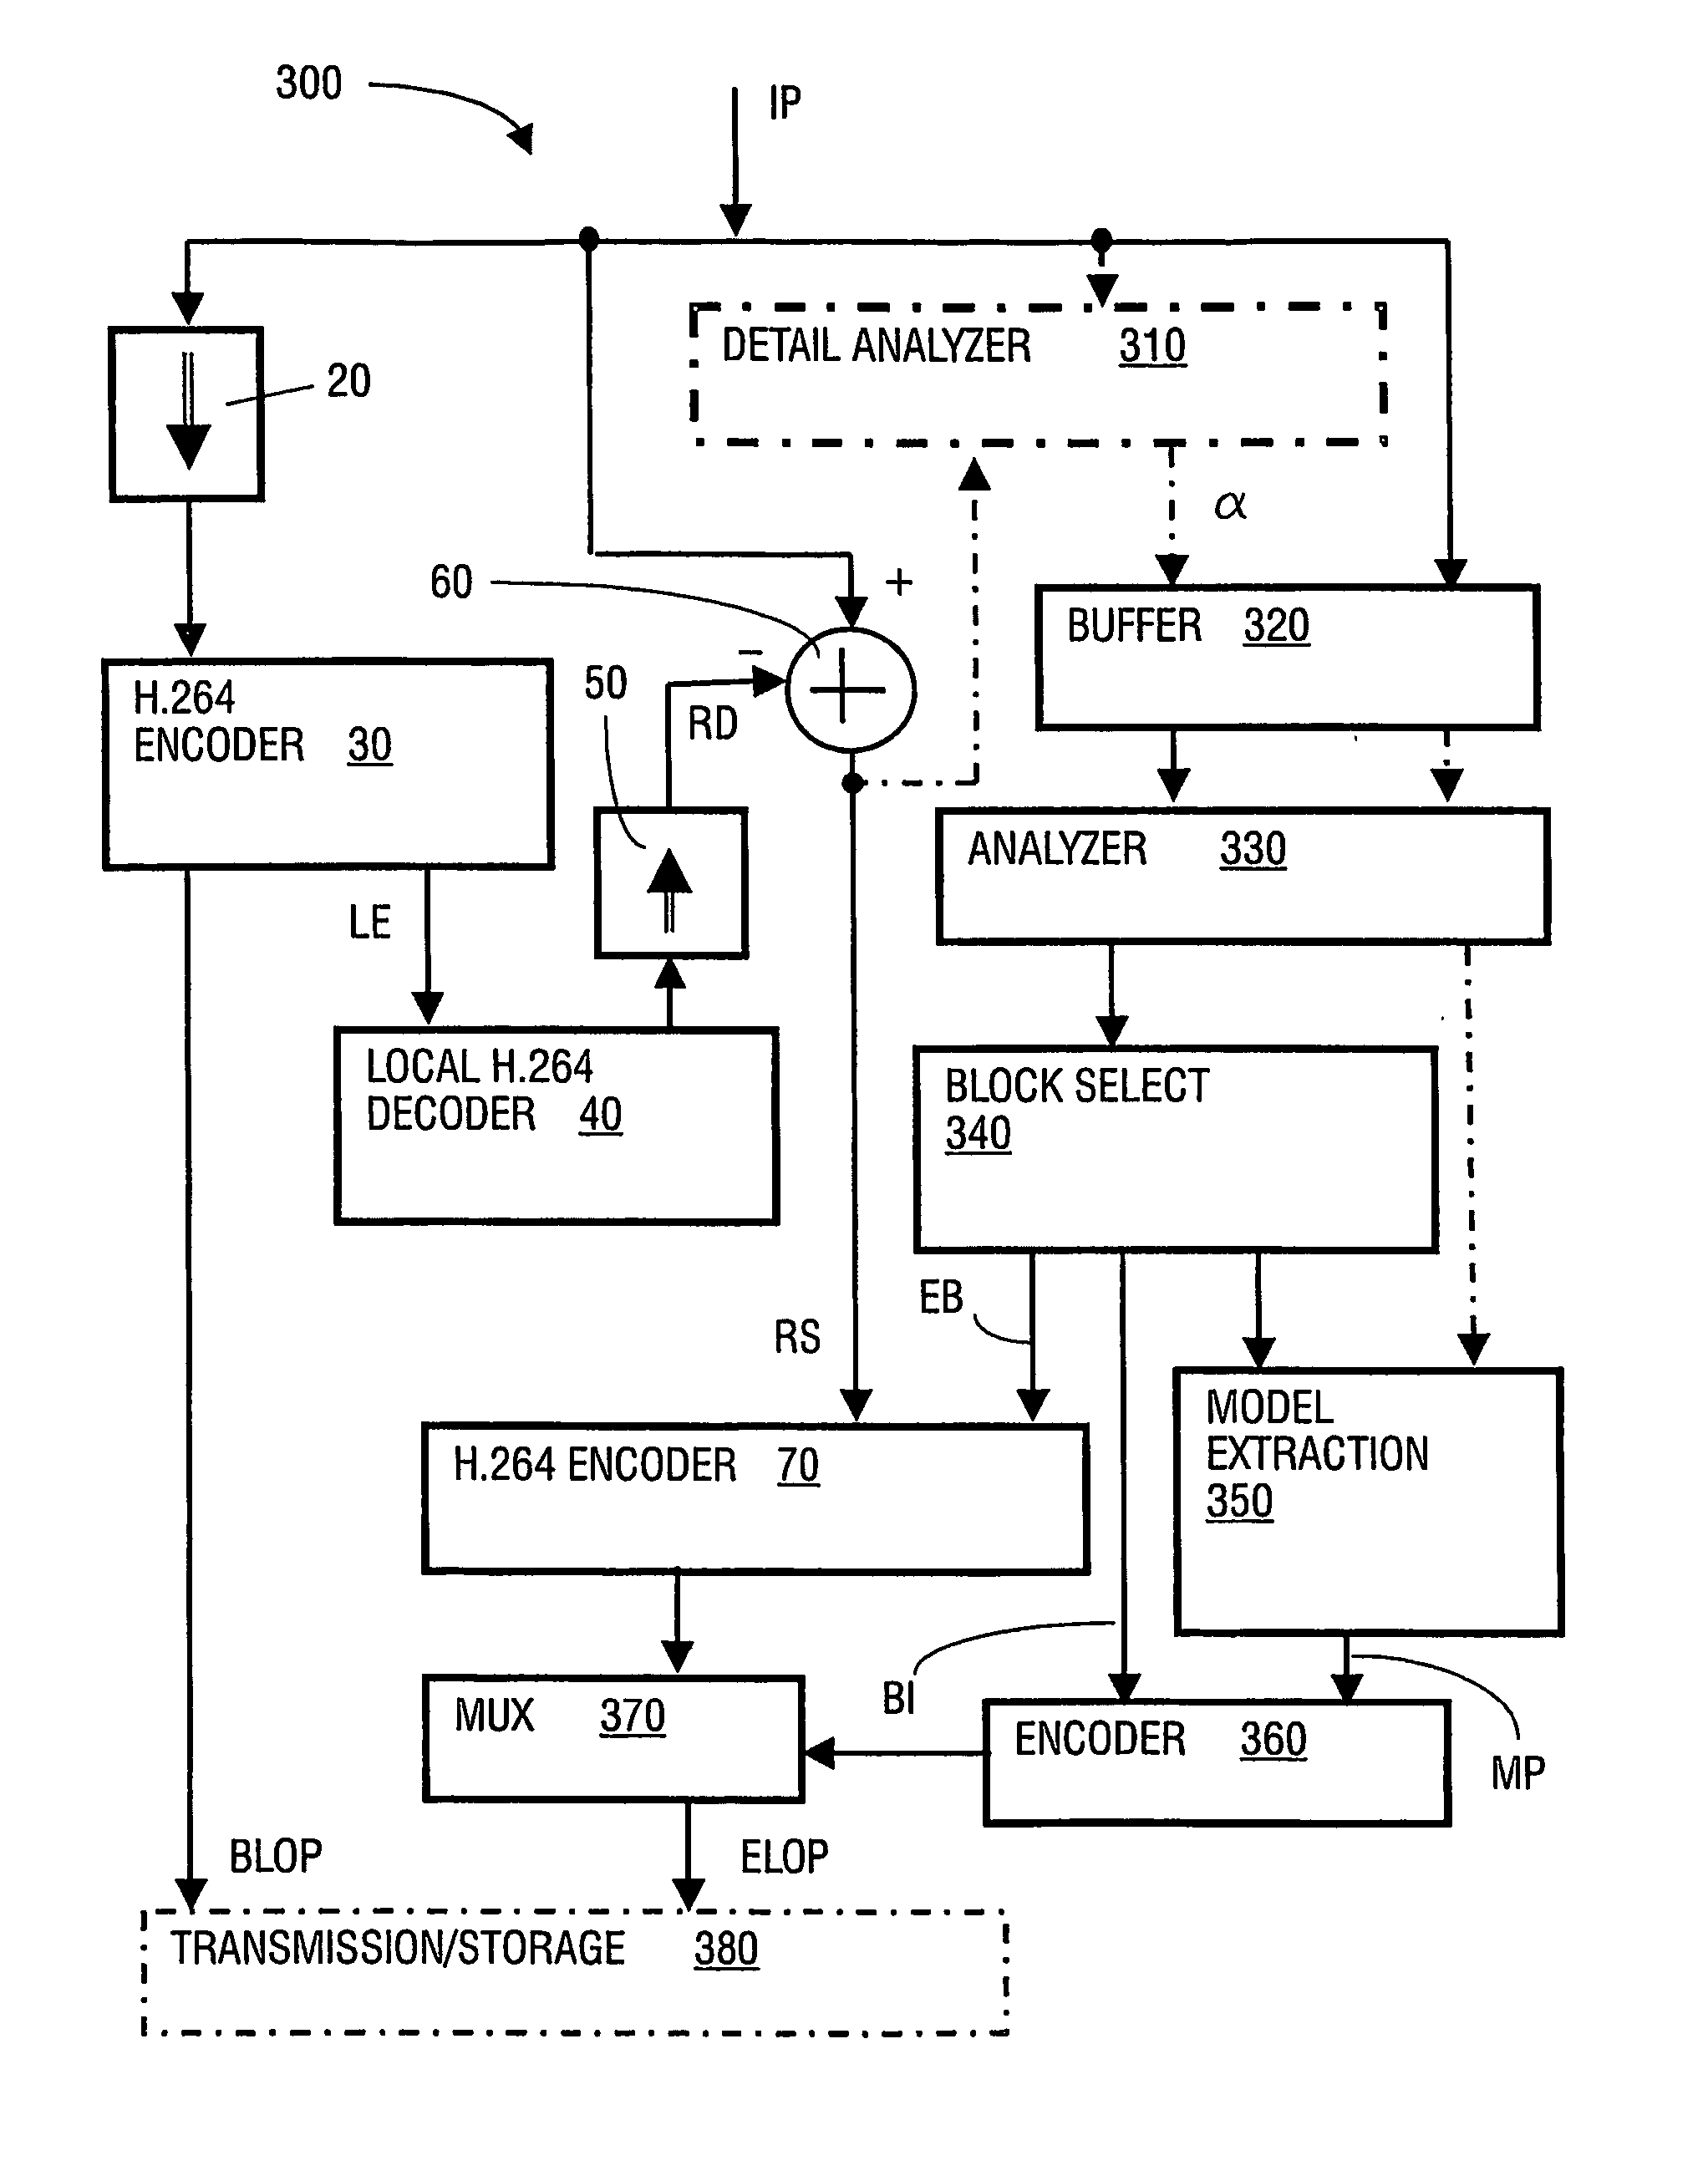 System and method for encoding and decoding enhancement layer data using descriptive model parameters